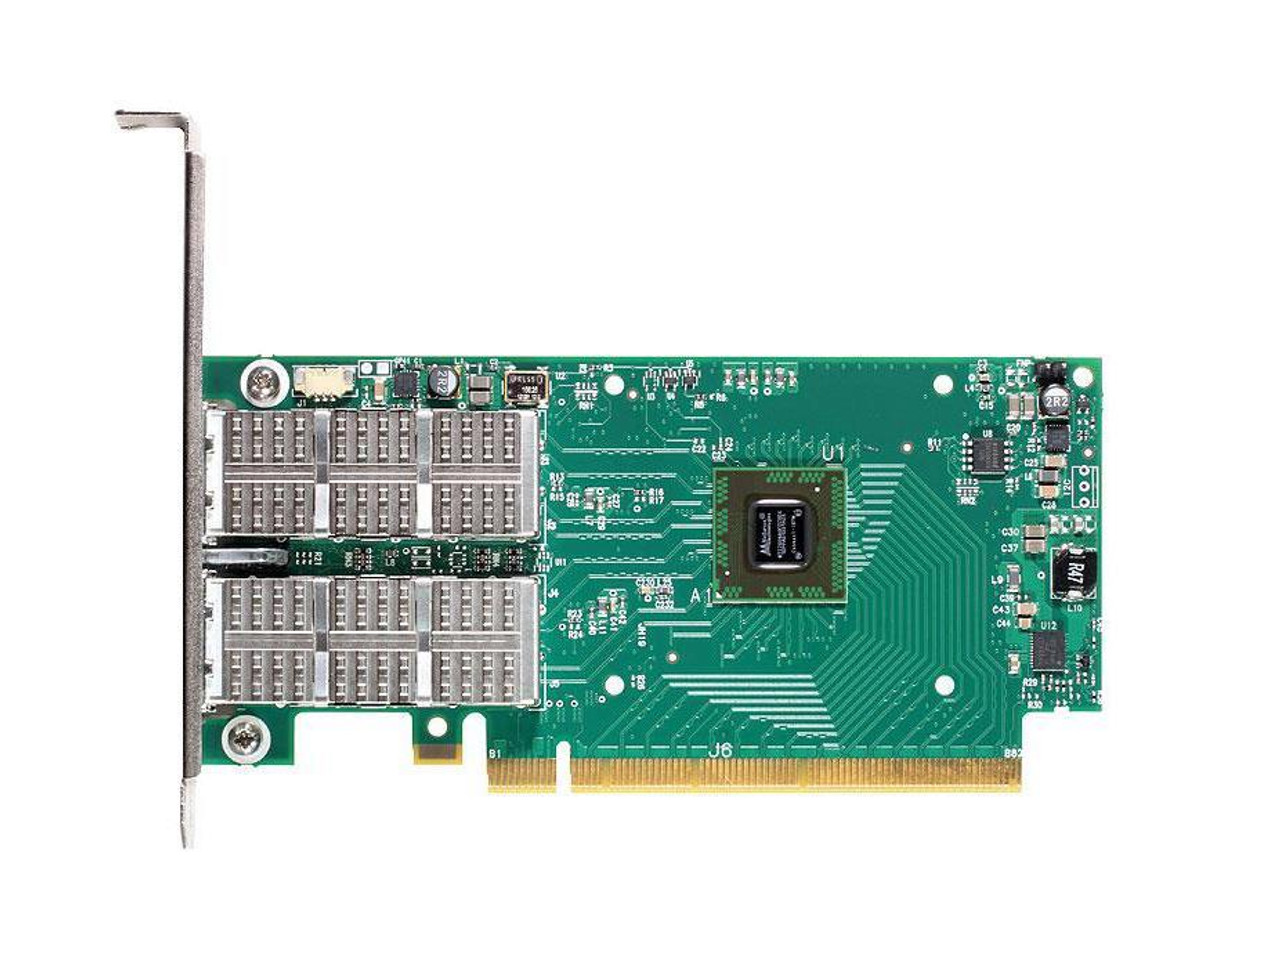 MCX354A-FCBT-AX Mellanox ConnectX-3 Dual-Ports 56Gbps QSFP+ 10 Gigabit Ethernet PCI Express 3.0 x8 Network Adapter with VPI